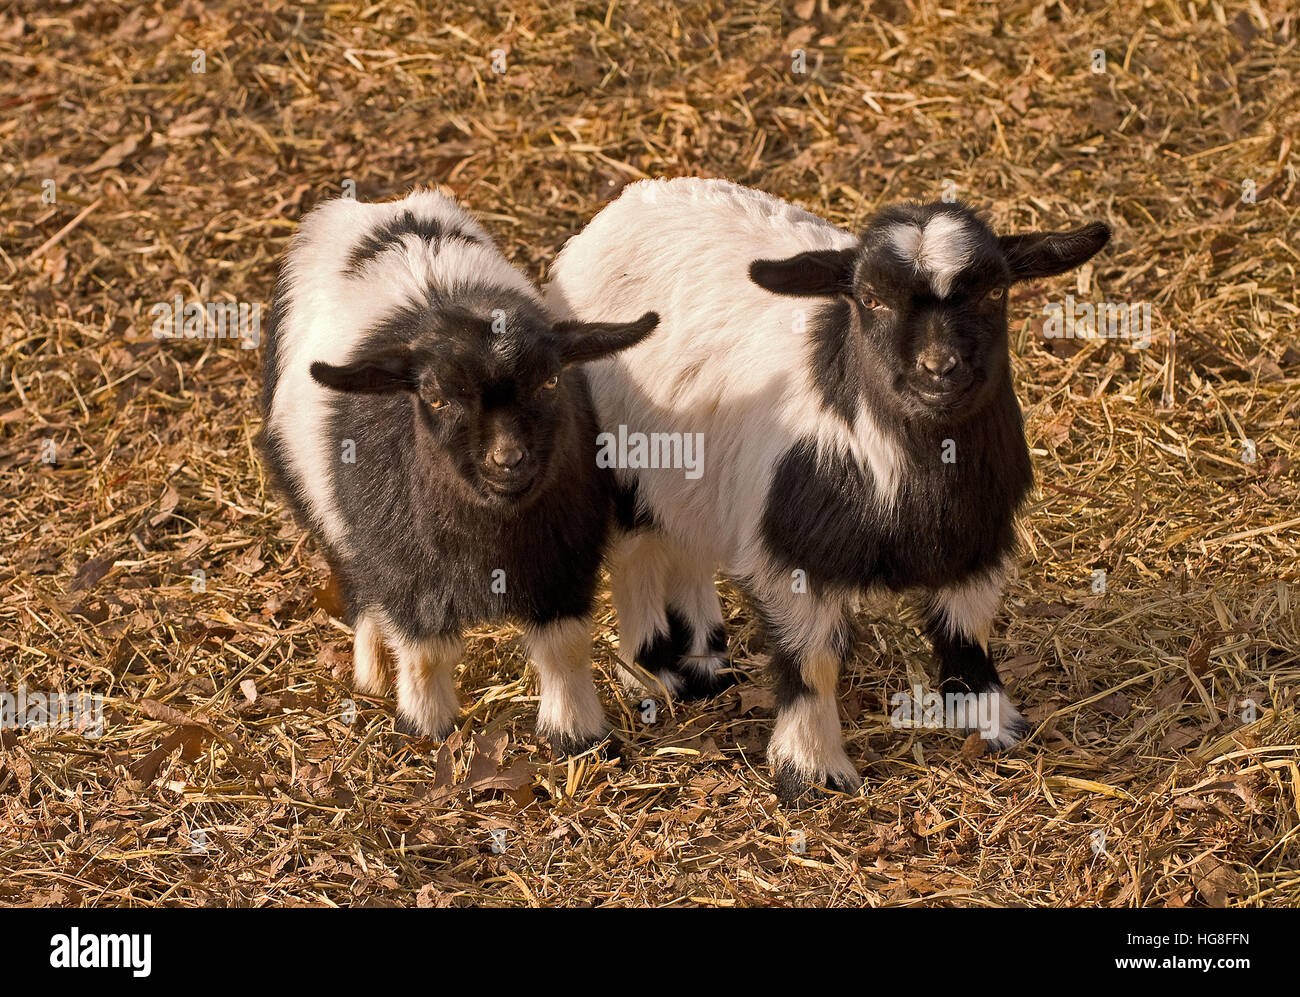 Two very young black and white Tennessee fainting goats(Capra aegagrus hircus) Stock Photo